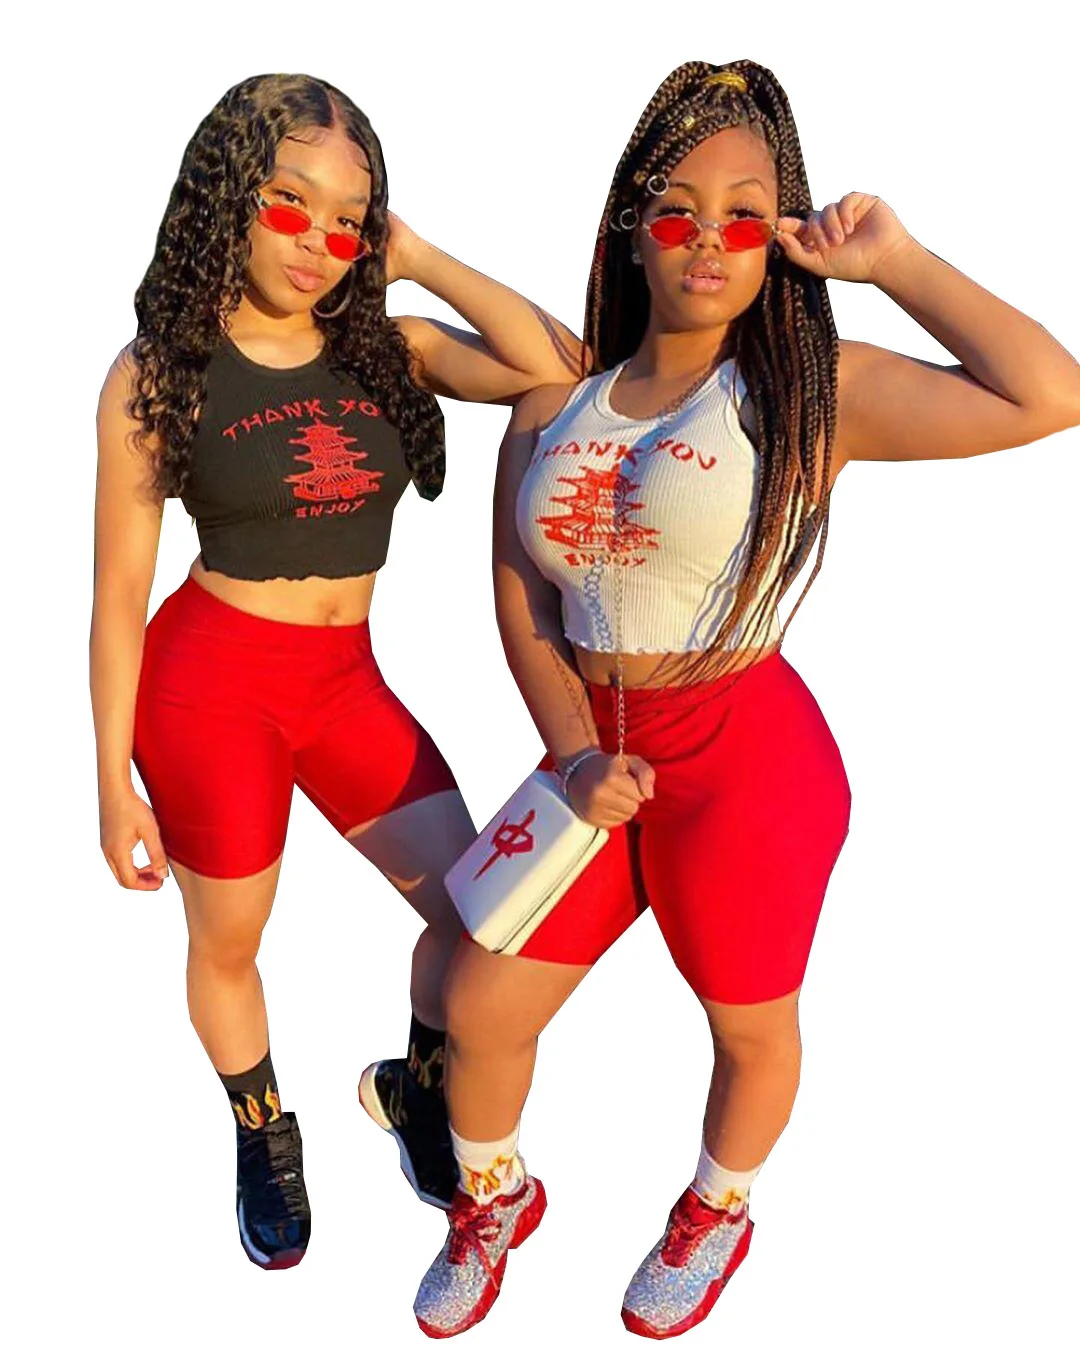 

Letter Printed Thank you Enjoy 2pcs Set Women Crop Top and Shorts Sets Sports Ribbed Biker 2 Piece Shorts Set Outfits